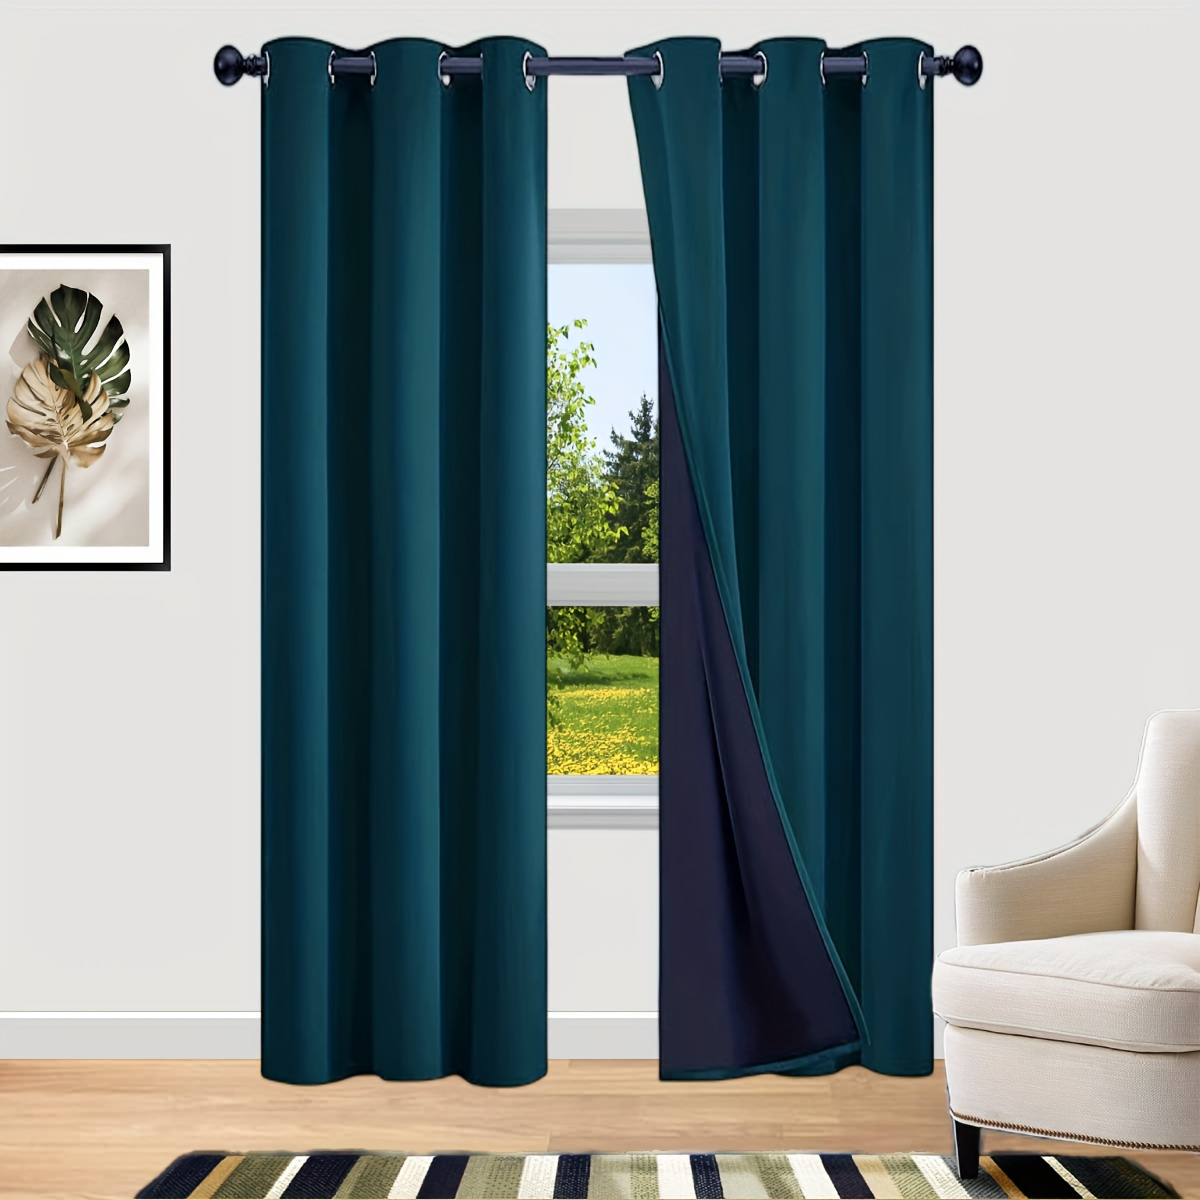 

2 Panels Blackout Curtains With Coated Thermal Insulation Simple Grommet Top Curtain For Bedroom Living Room Office Home Decor